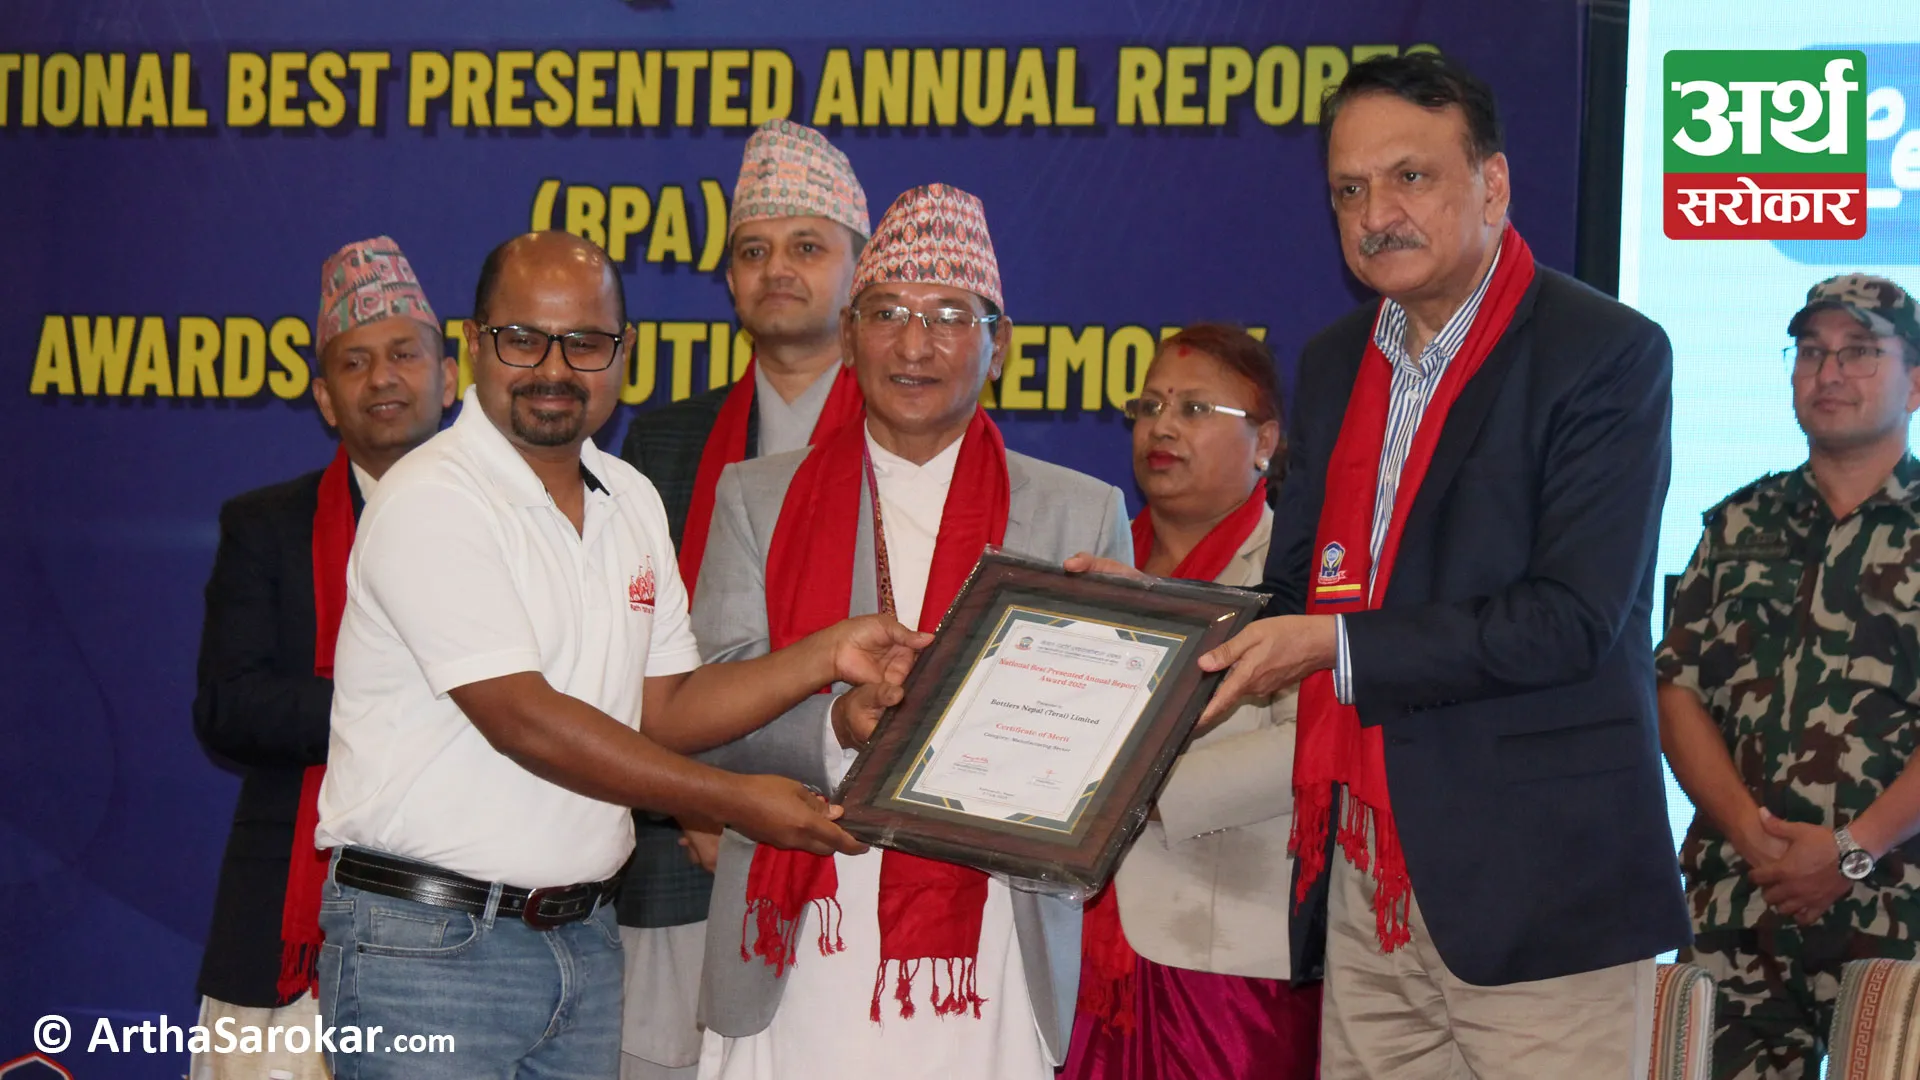 Bottlers Nepal Limited Awarded Gold for Best Presented Annual Report 2022